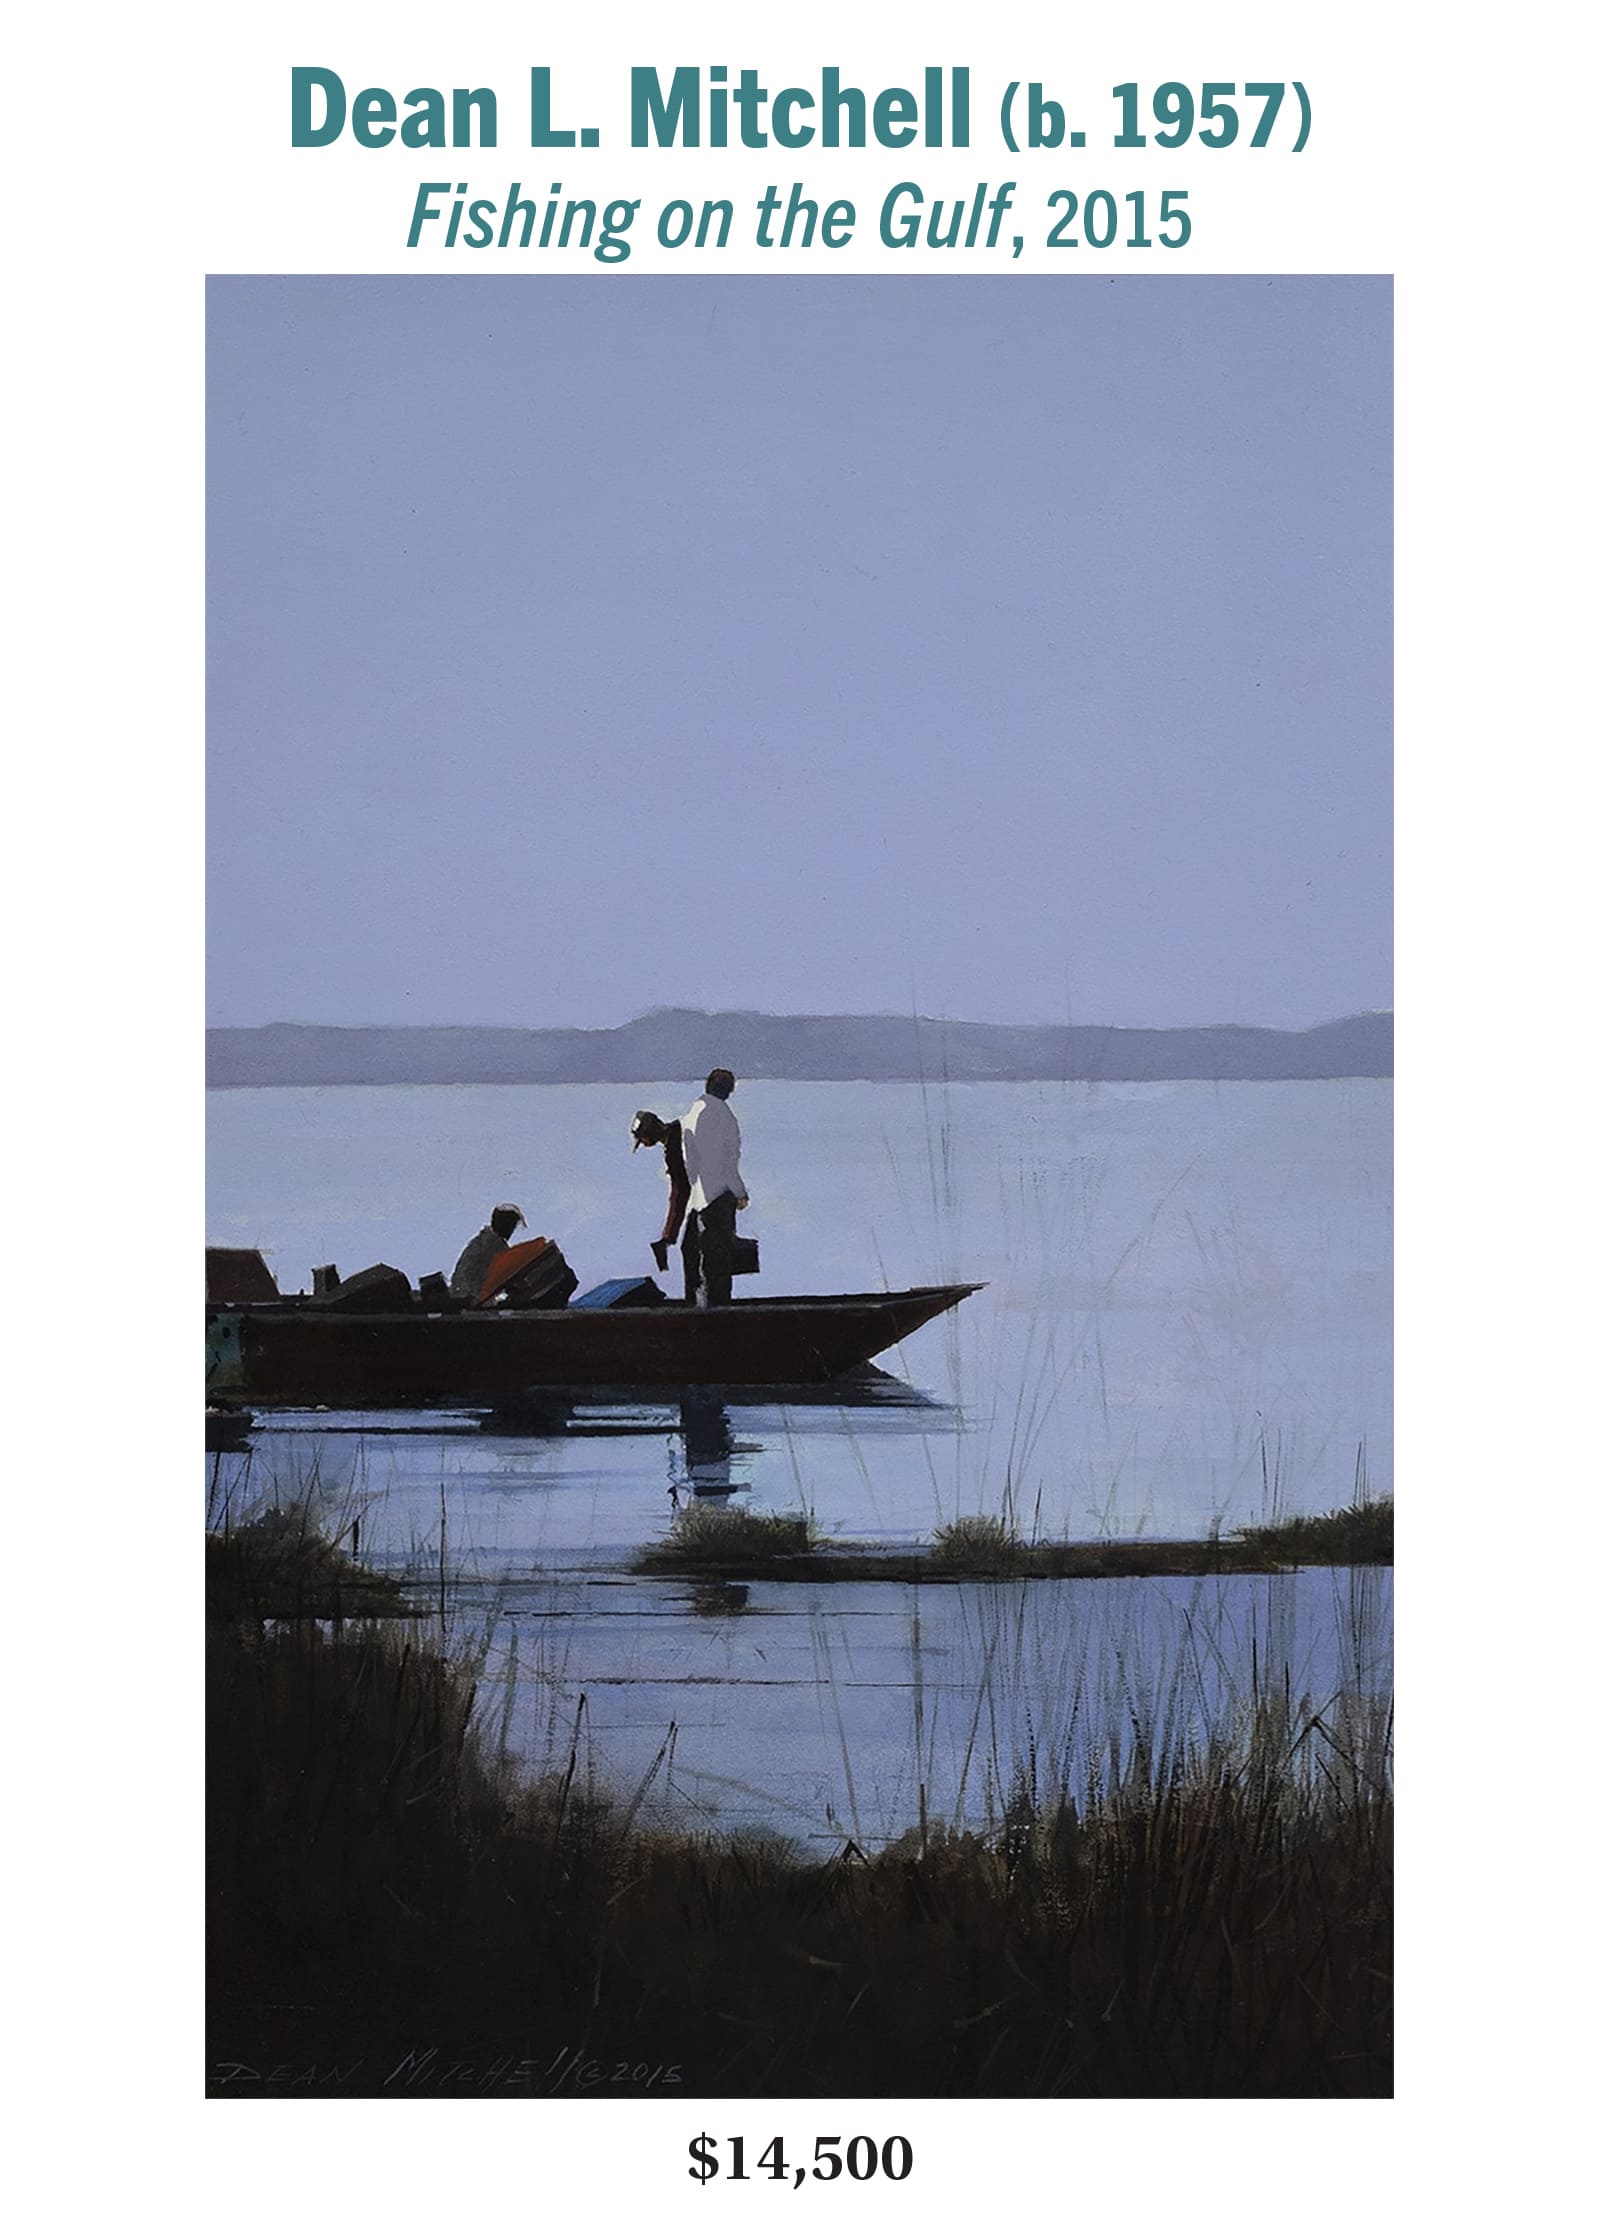 Dean L. Mitchell (b. 1957), Fishing on the Gulf, 2015, acrylic on board, American contemporary landscape painting